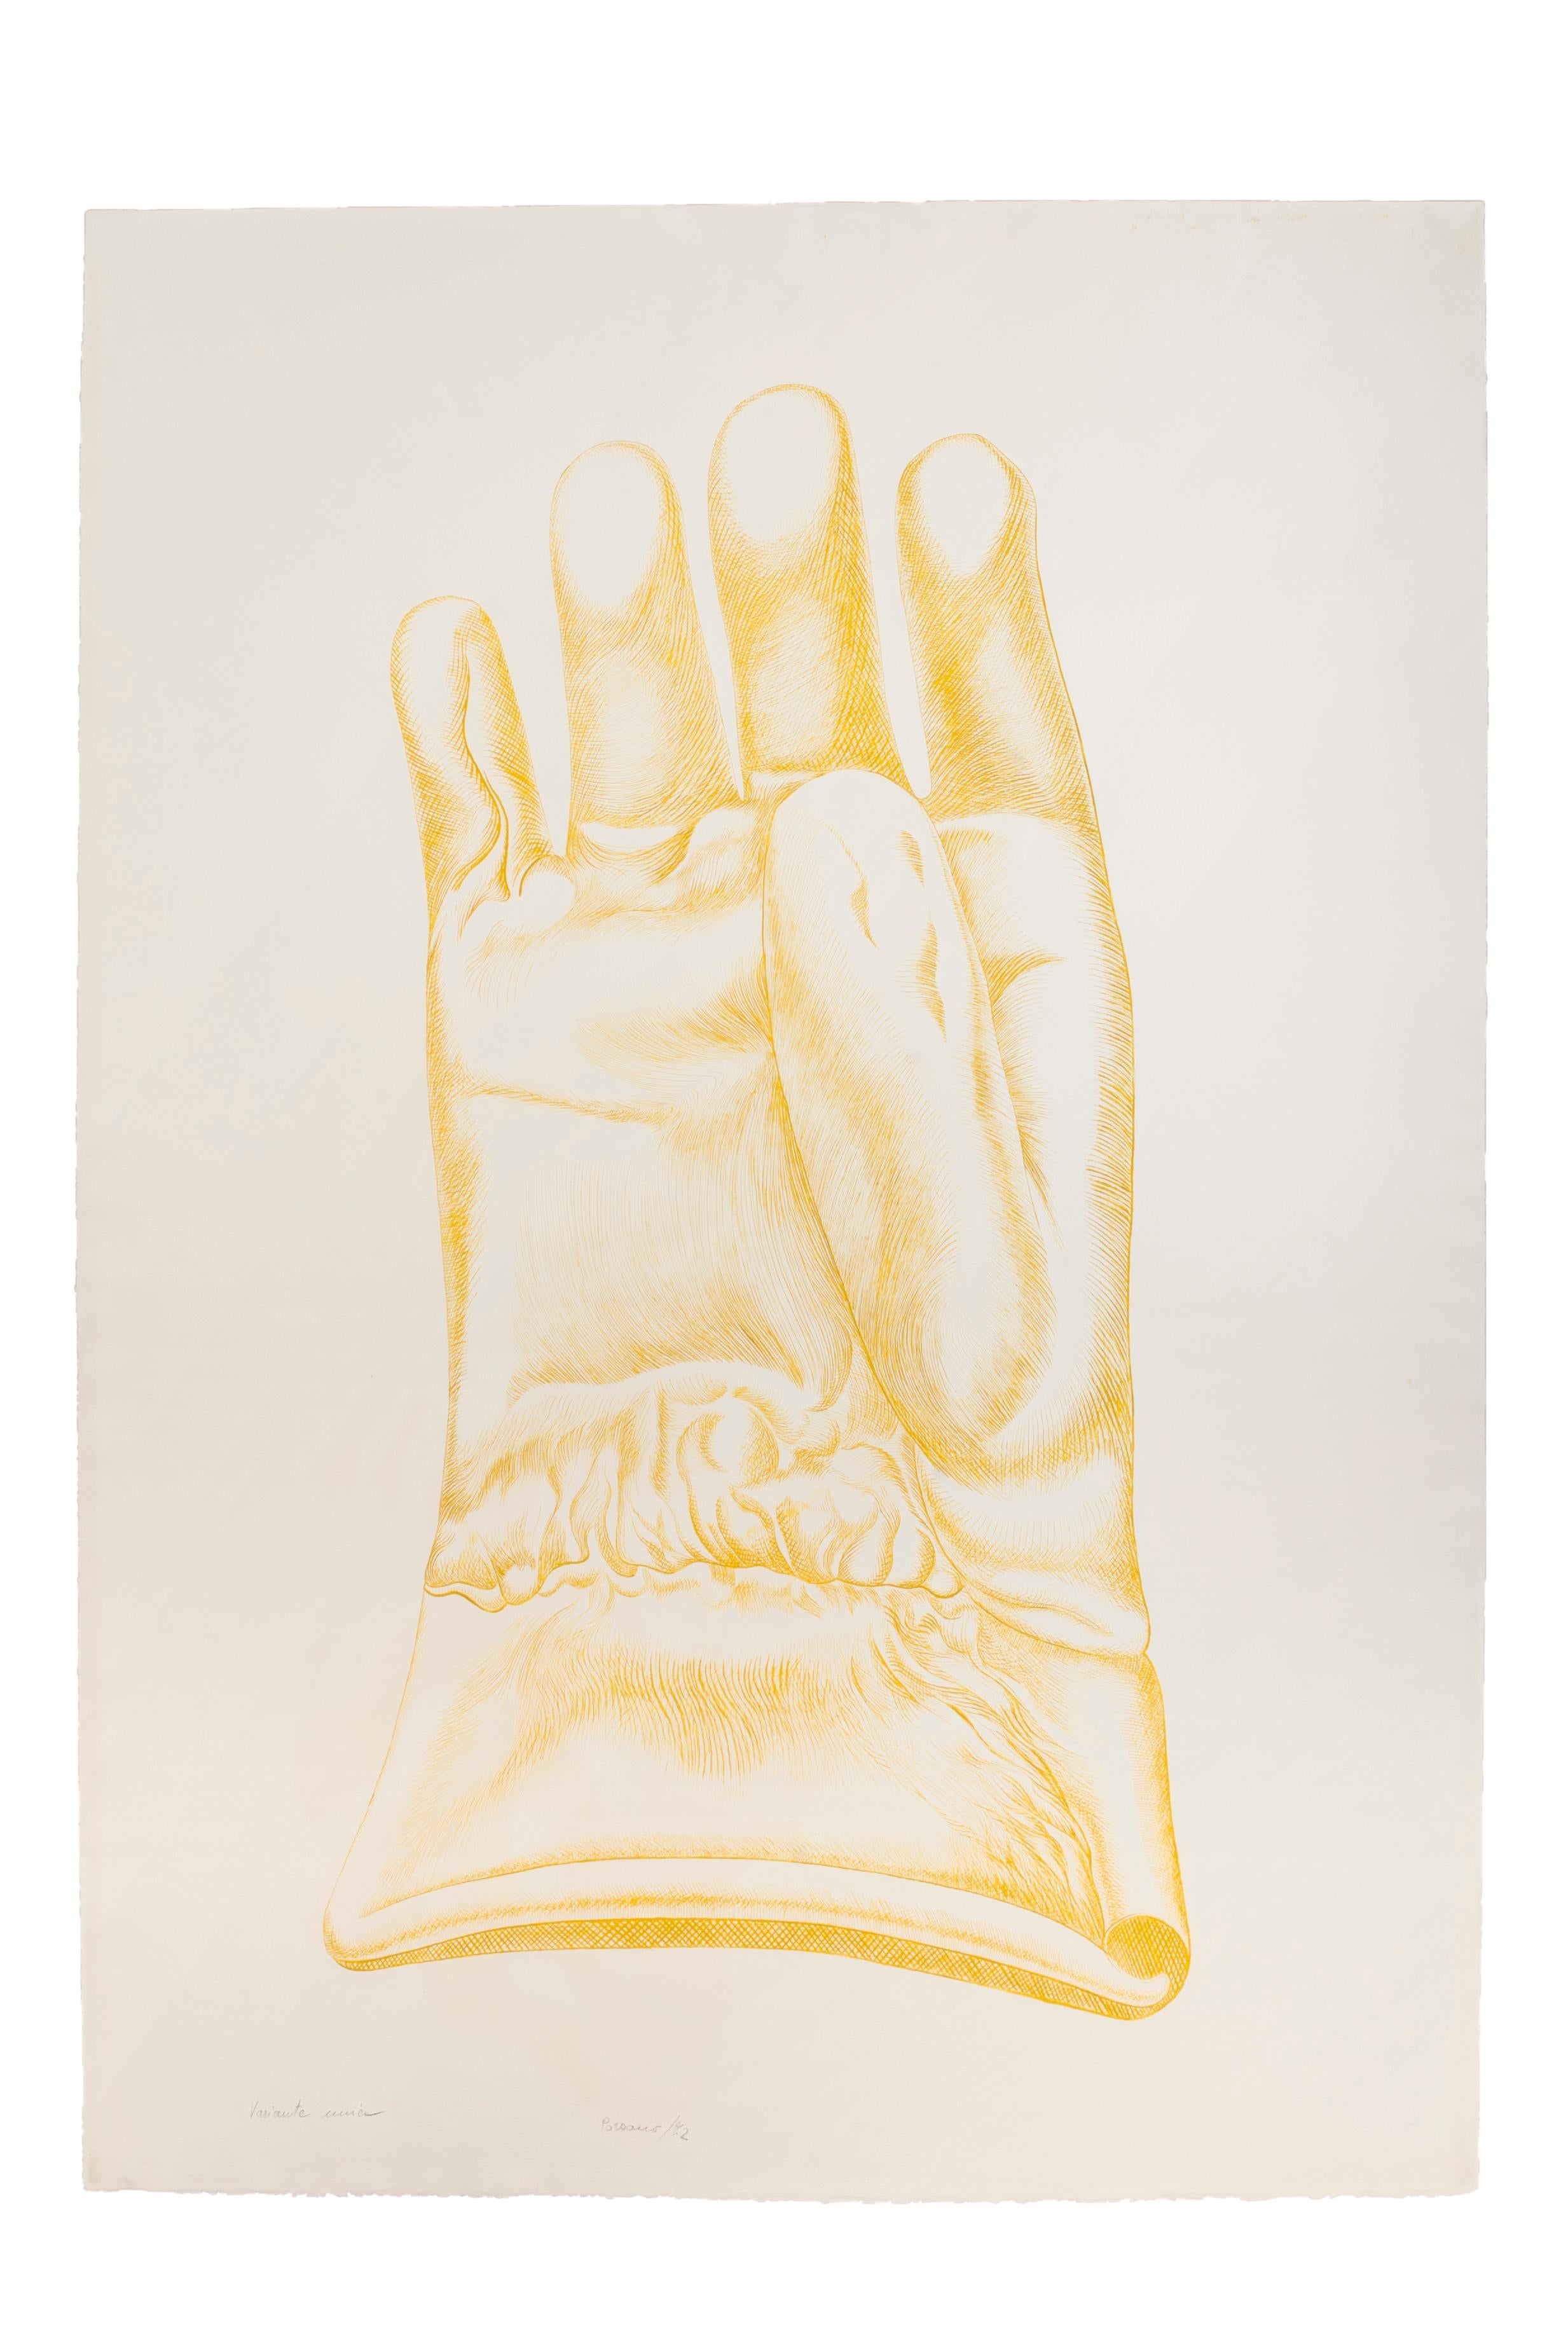 Yellow glove - Guanto giallo is a beautiful color etching on paper, realized in 1972 by the Italian artist Giacomo Porzano (1925-2006).
This is the precious unique variant, as the pencil inscriptions report on the lower margin: "Variante unica /